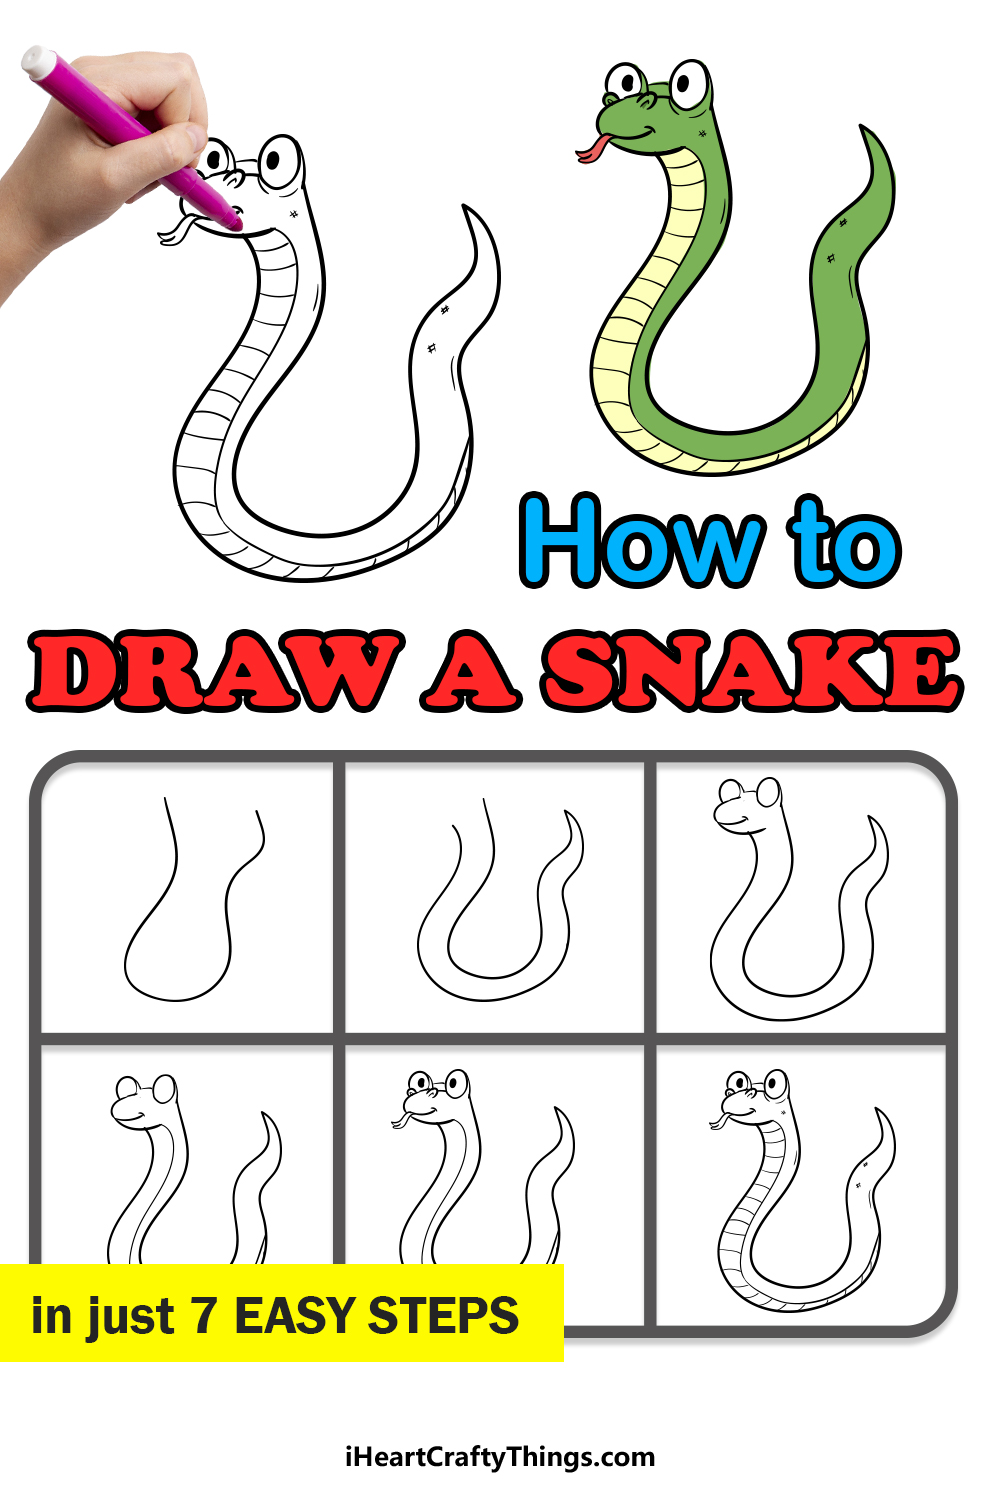 how to draw a snake in 7 easy steps